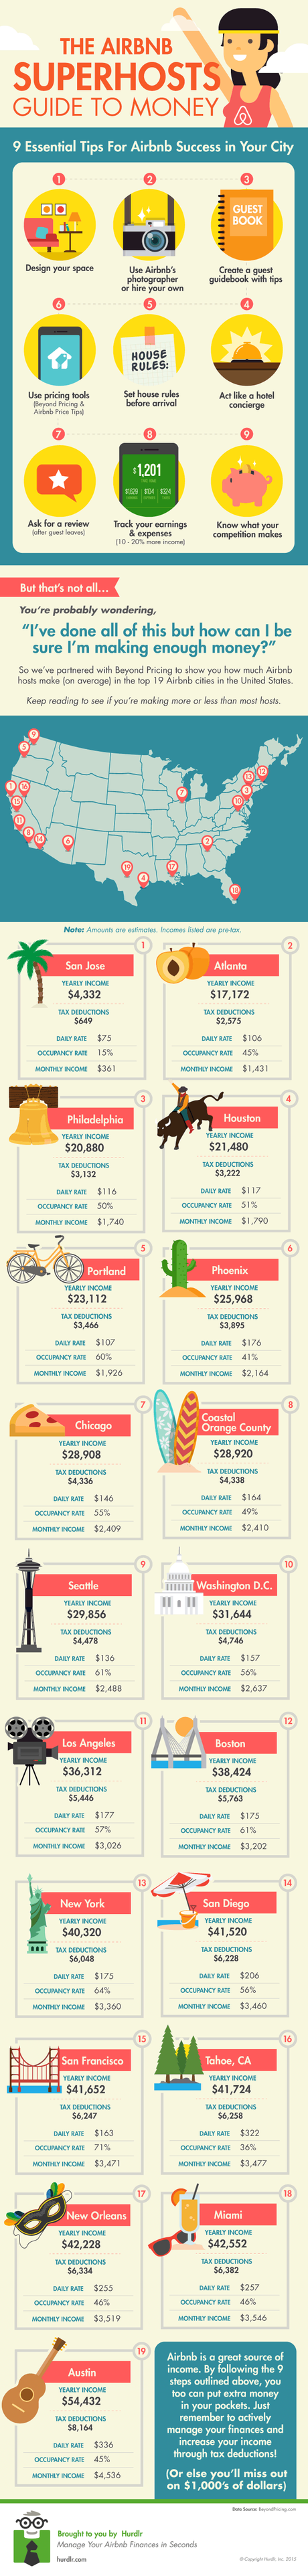 airbnb-superhost-infographic